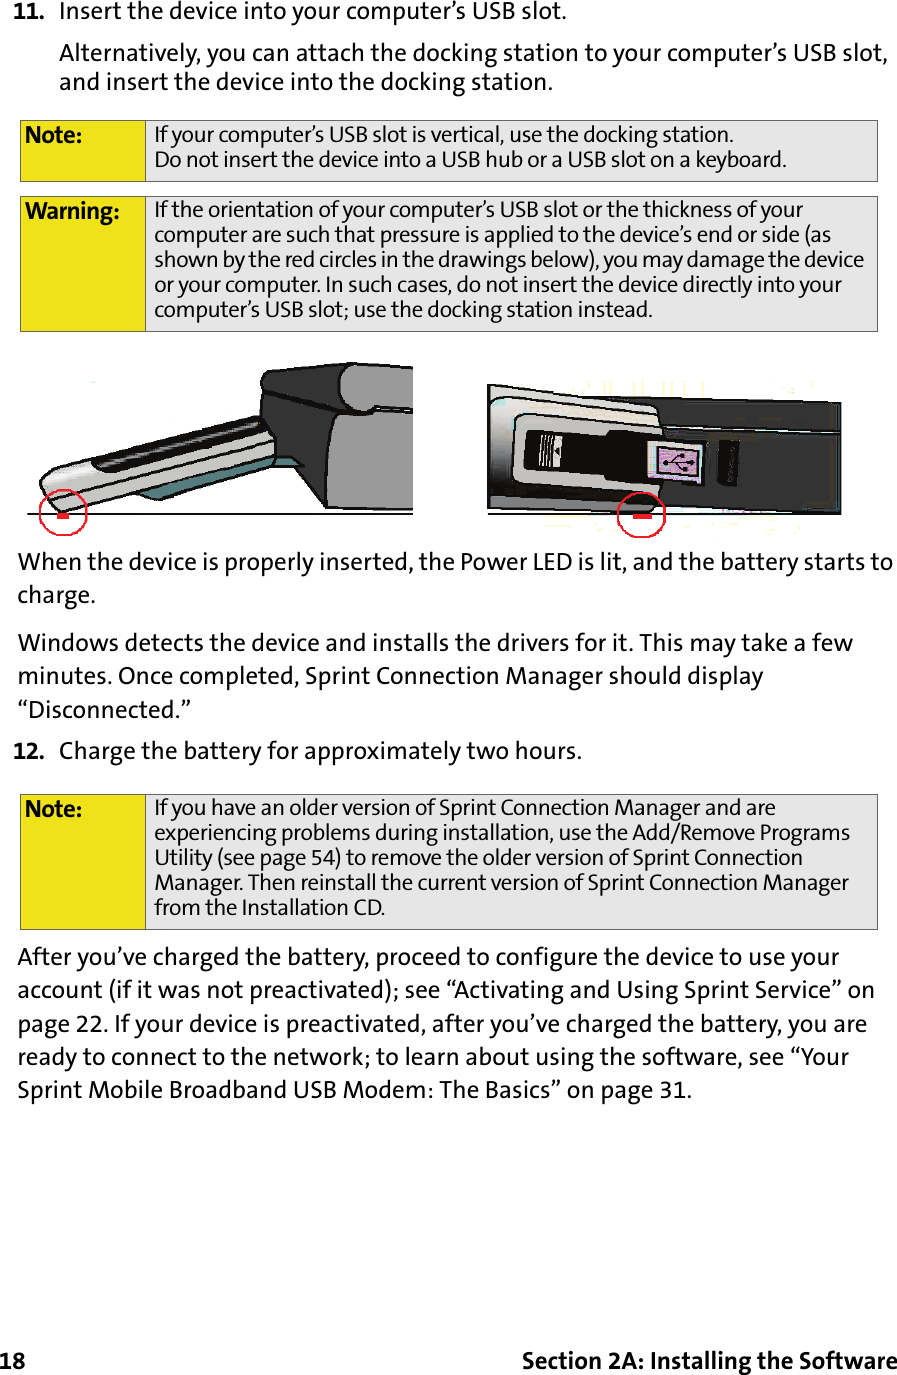 18 Section 2A: Installing the Software11. Insert the device into your computer’s USB slot.Alternatively, you can attach the docking station to your computer’s USB slot, and insert the device into the docking station.When the device is properly inserted, the Power LED is lit, and the battery starts to charge.Windows detects the device and installs the drivers for it. This may take a few minutes. Once completed, Sprint Connection Manager should display “Disconnected.”12. Charge the battery for approximately two hours.After you’ve charged the battery, proceed to configure the device to use your account (if it was not preactivated); see “Activating and Using Sprint Service” on page 22. If your device is preactivated, after you’ve charged the battery, you are ready to connect to the network; to learn about using the software, see “Your Sprint Mobile Broadband USB Modem: The Basics” on page 31.Note: If your computer’s USB slot is vertical, use the docking station. Do not insert the device into a USB hub or a USB slot on a keyboard.Warning: If the orientation of your computer’s USB slot or the thickness of your computer are such that pressure is applied to the device’s end or side (as shown by the red circles in the drawings below), you may damage the device or your computer. In such cases, do not insert the device directly into your computer’s USB slot; use the docking station instead.Note: If you have an older version of Sprint Connection Manager and are experiencing problems during installation, use the Add/Remove Programs Utility (see page 54) to remove the older version of Sprint Connection Manager. Then reinstall the current version of Sprint Connection Manager from the Installation CD.